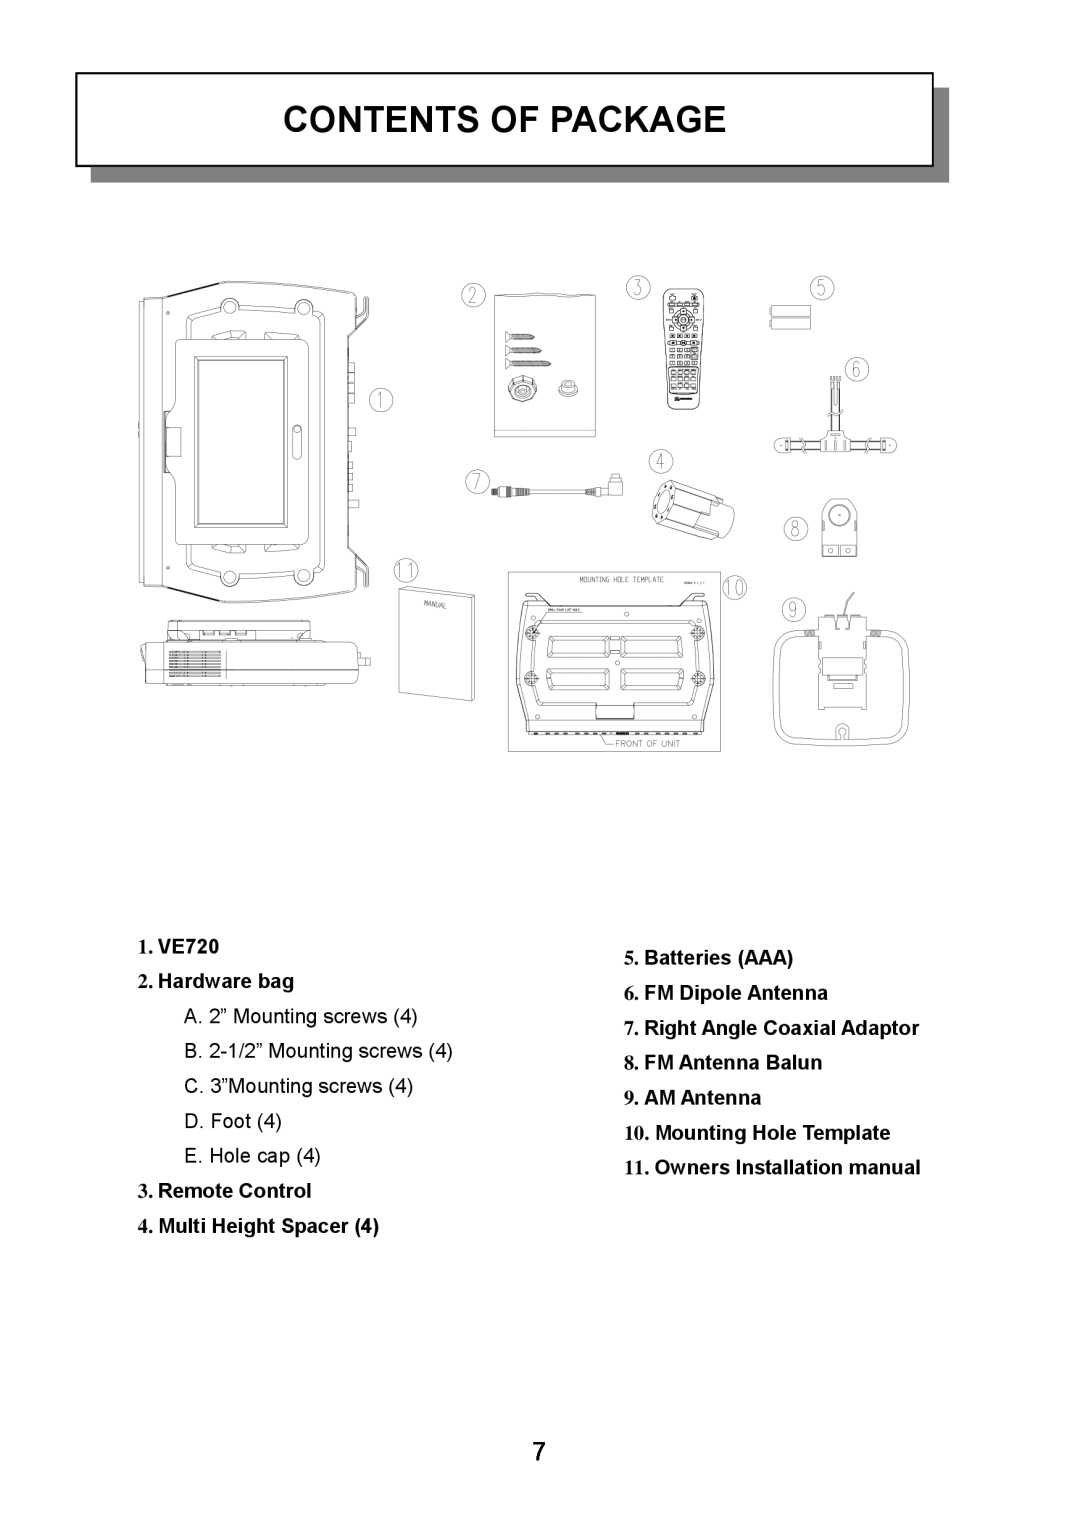 Audiovox manual Contents Of Package, 1. VE720 2. Hardware bag, Remote Control 4. Multi Height Spacer 